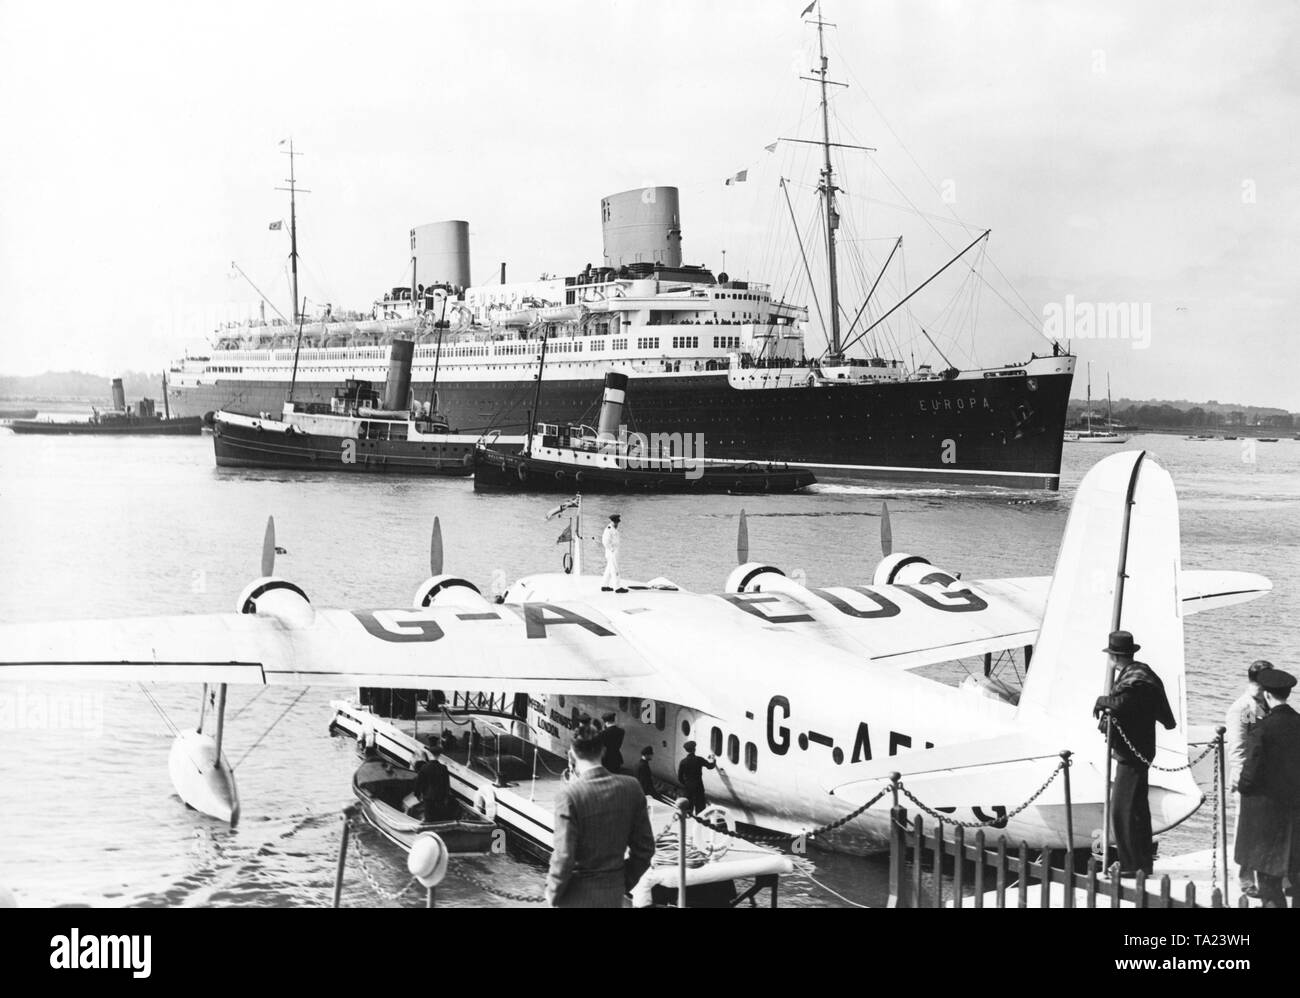 The fast steamer 'Europa' of Norddeutscher Lloyd is in the port of Southampton. In the foreground, the flying boat Short Empire G-AEUG Coogee of the Imperial Airways. On the left side of the flying boat is a raft, over which passengers can board the plane. Stock Photo